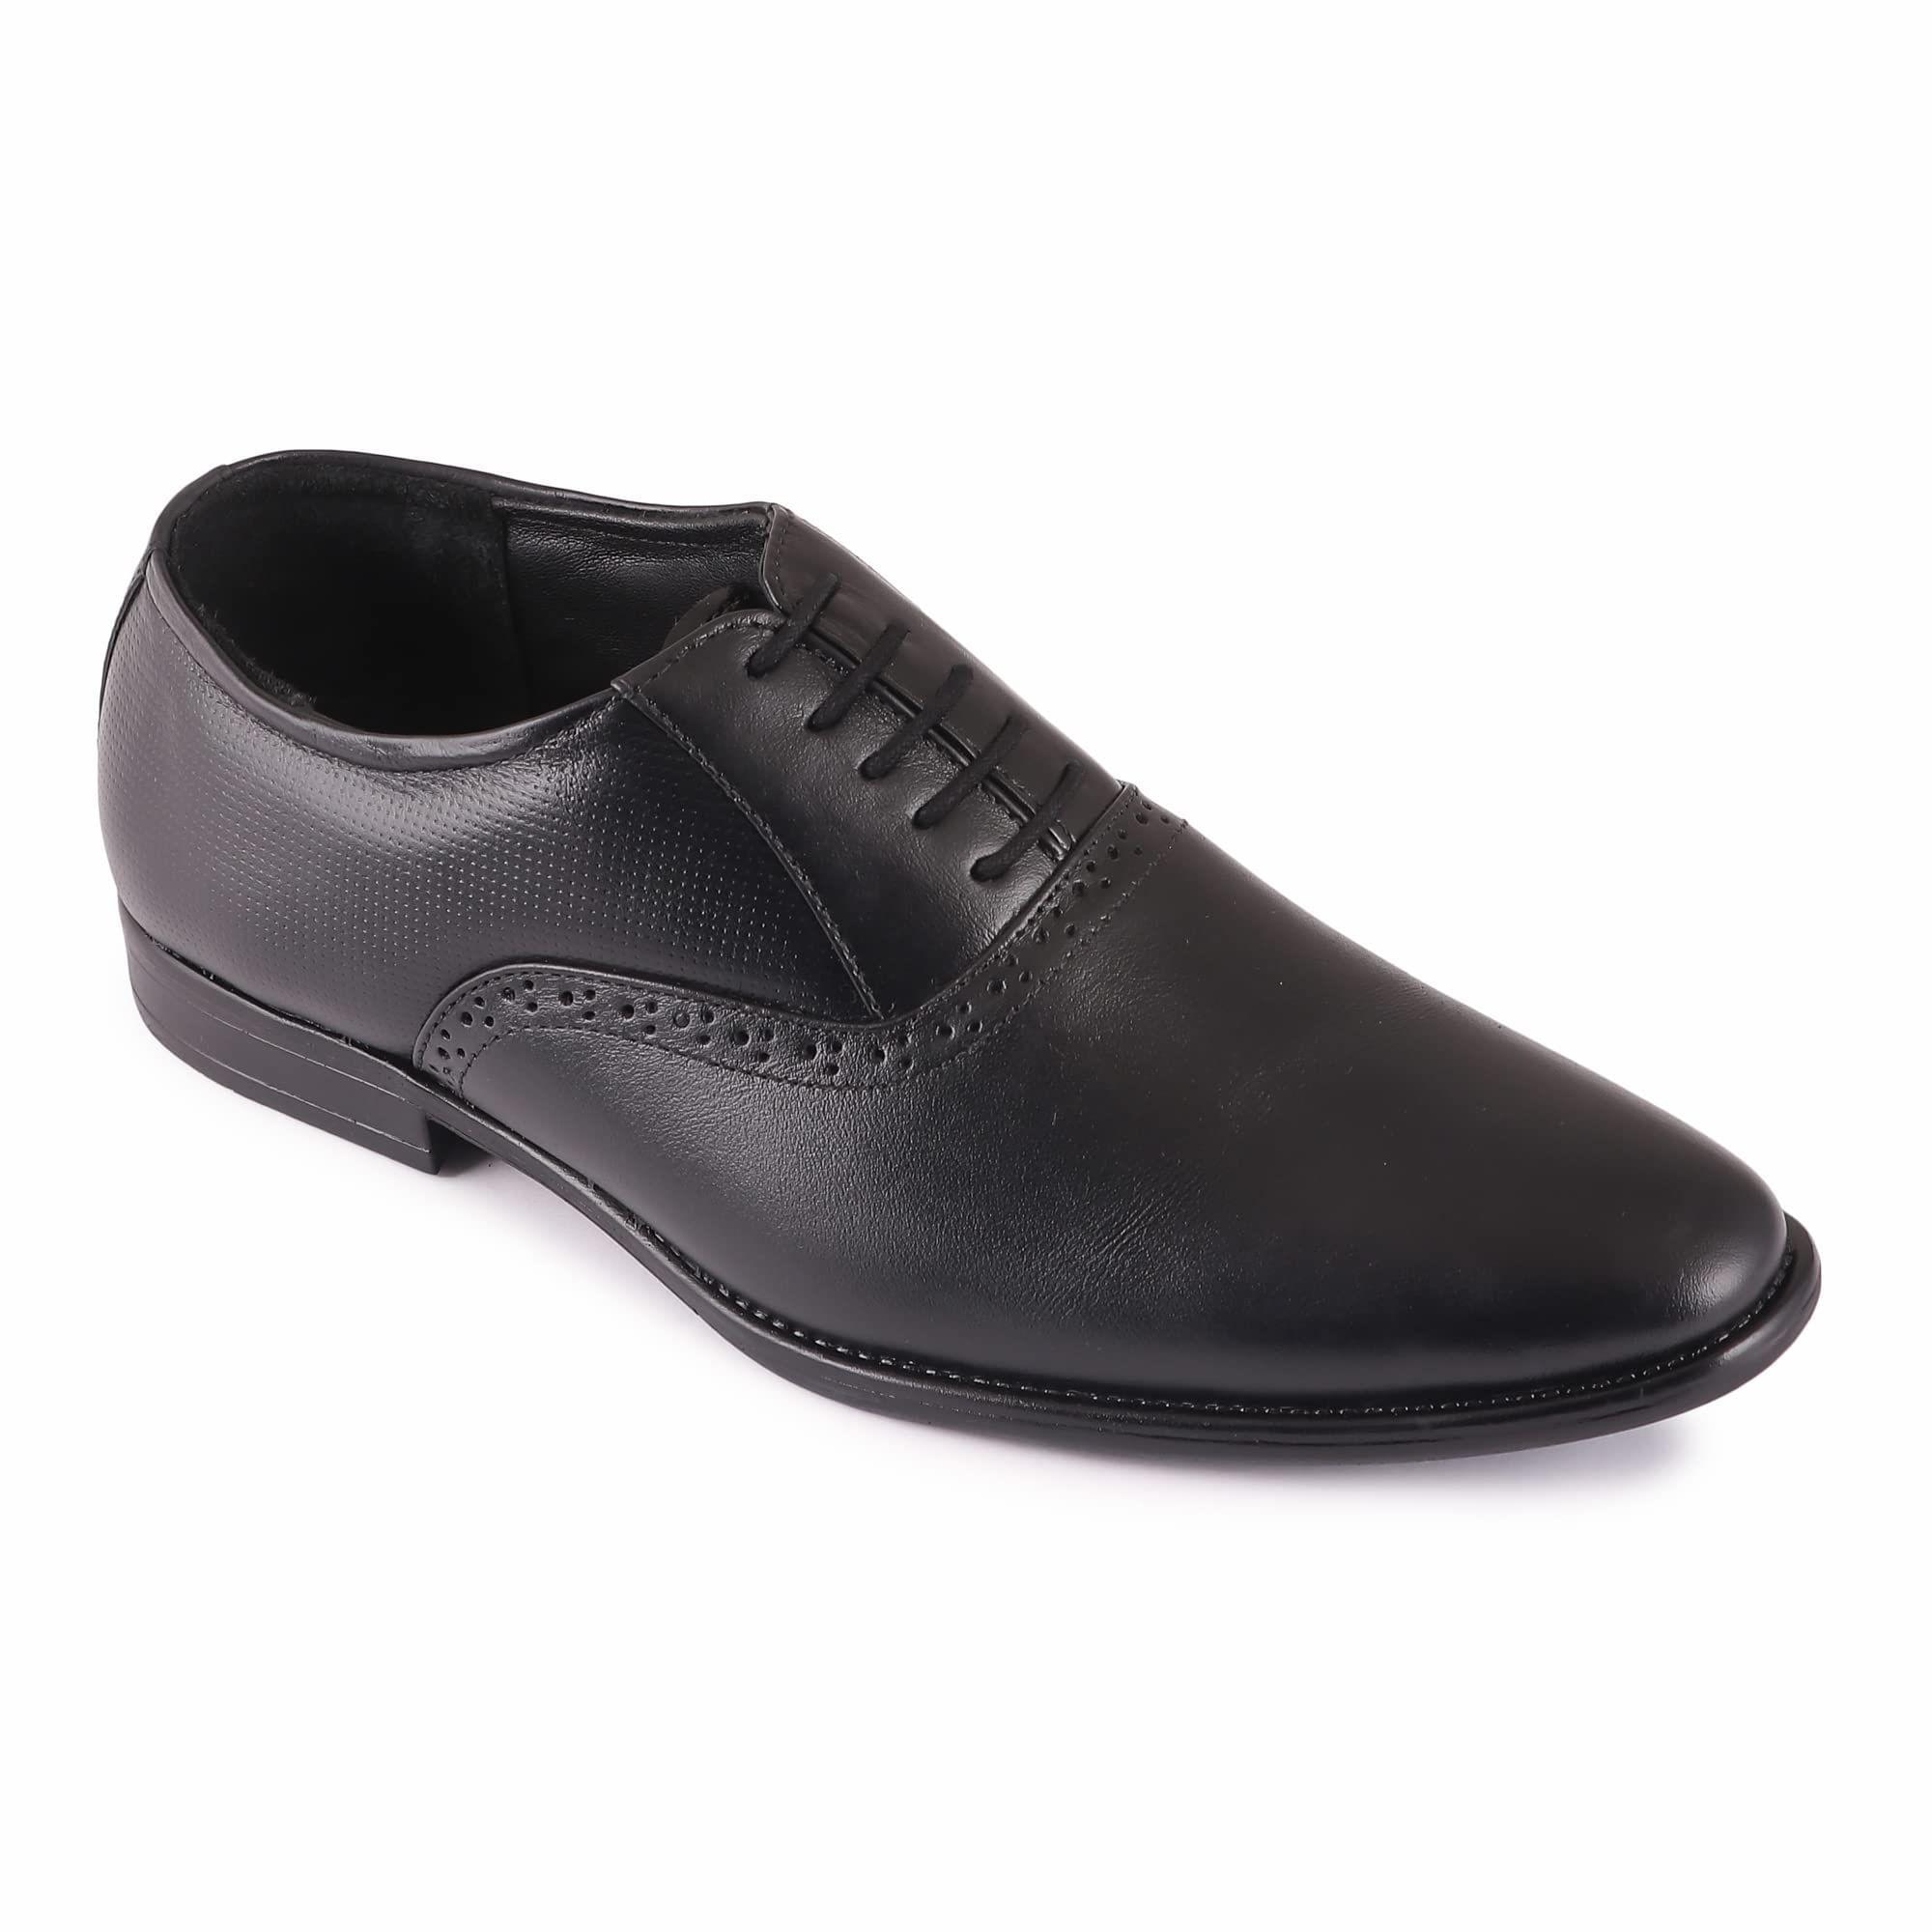 Nickron India's trendsetting collection of stylish shoes for men